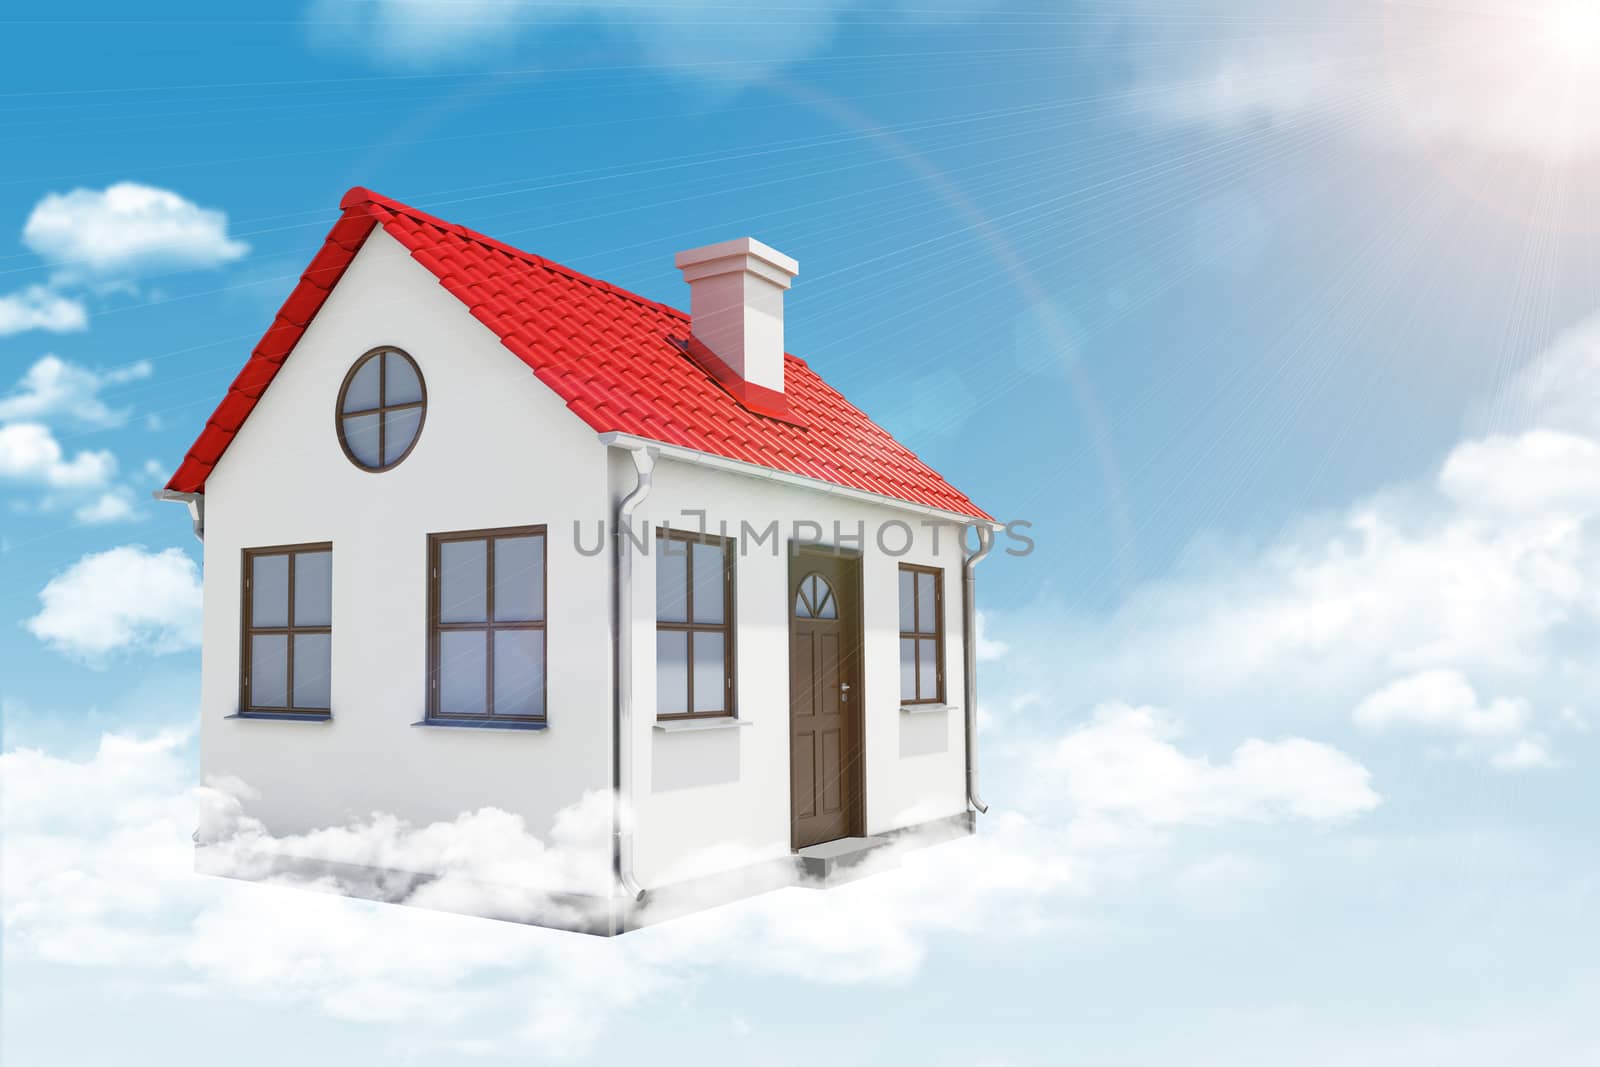 White house with red roof, brown door and chimney in cloud. Background sun shines brightly. Blue sky